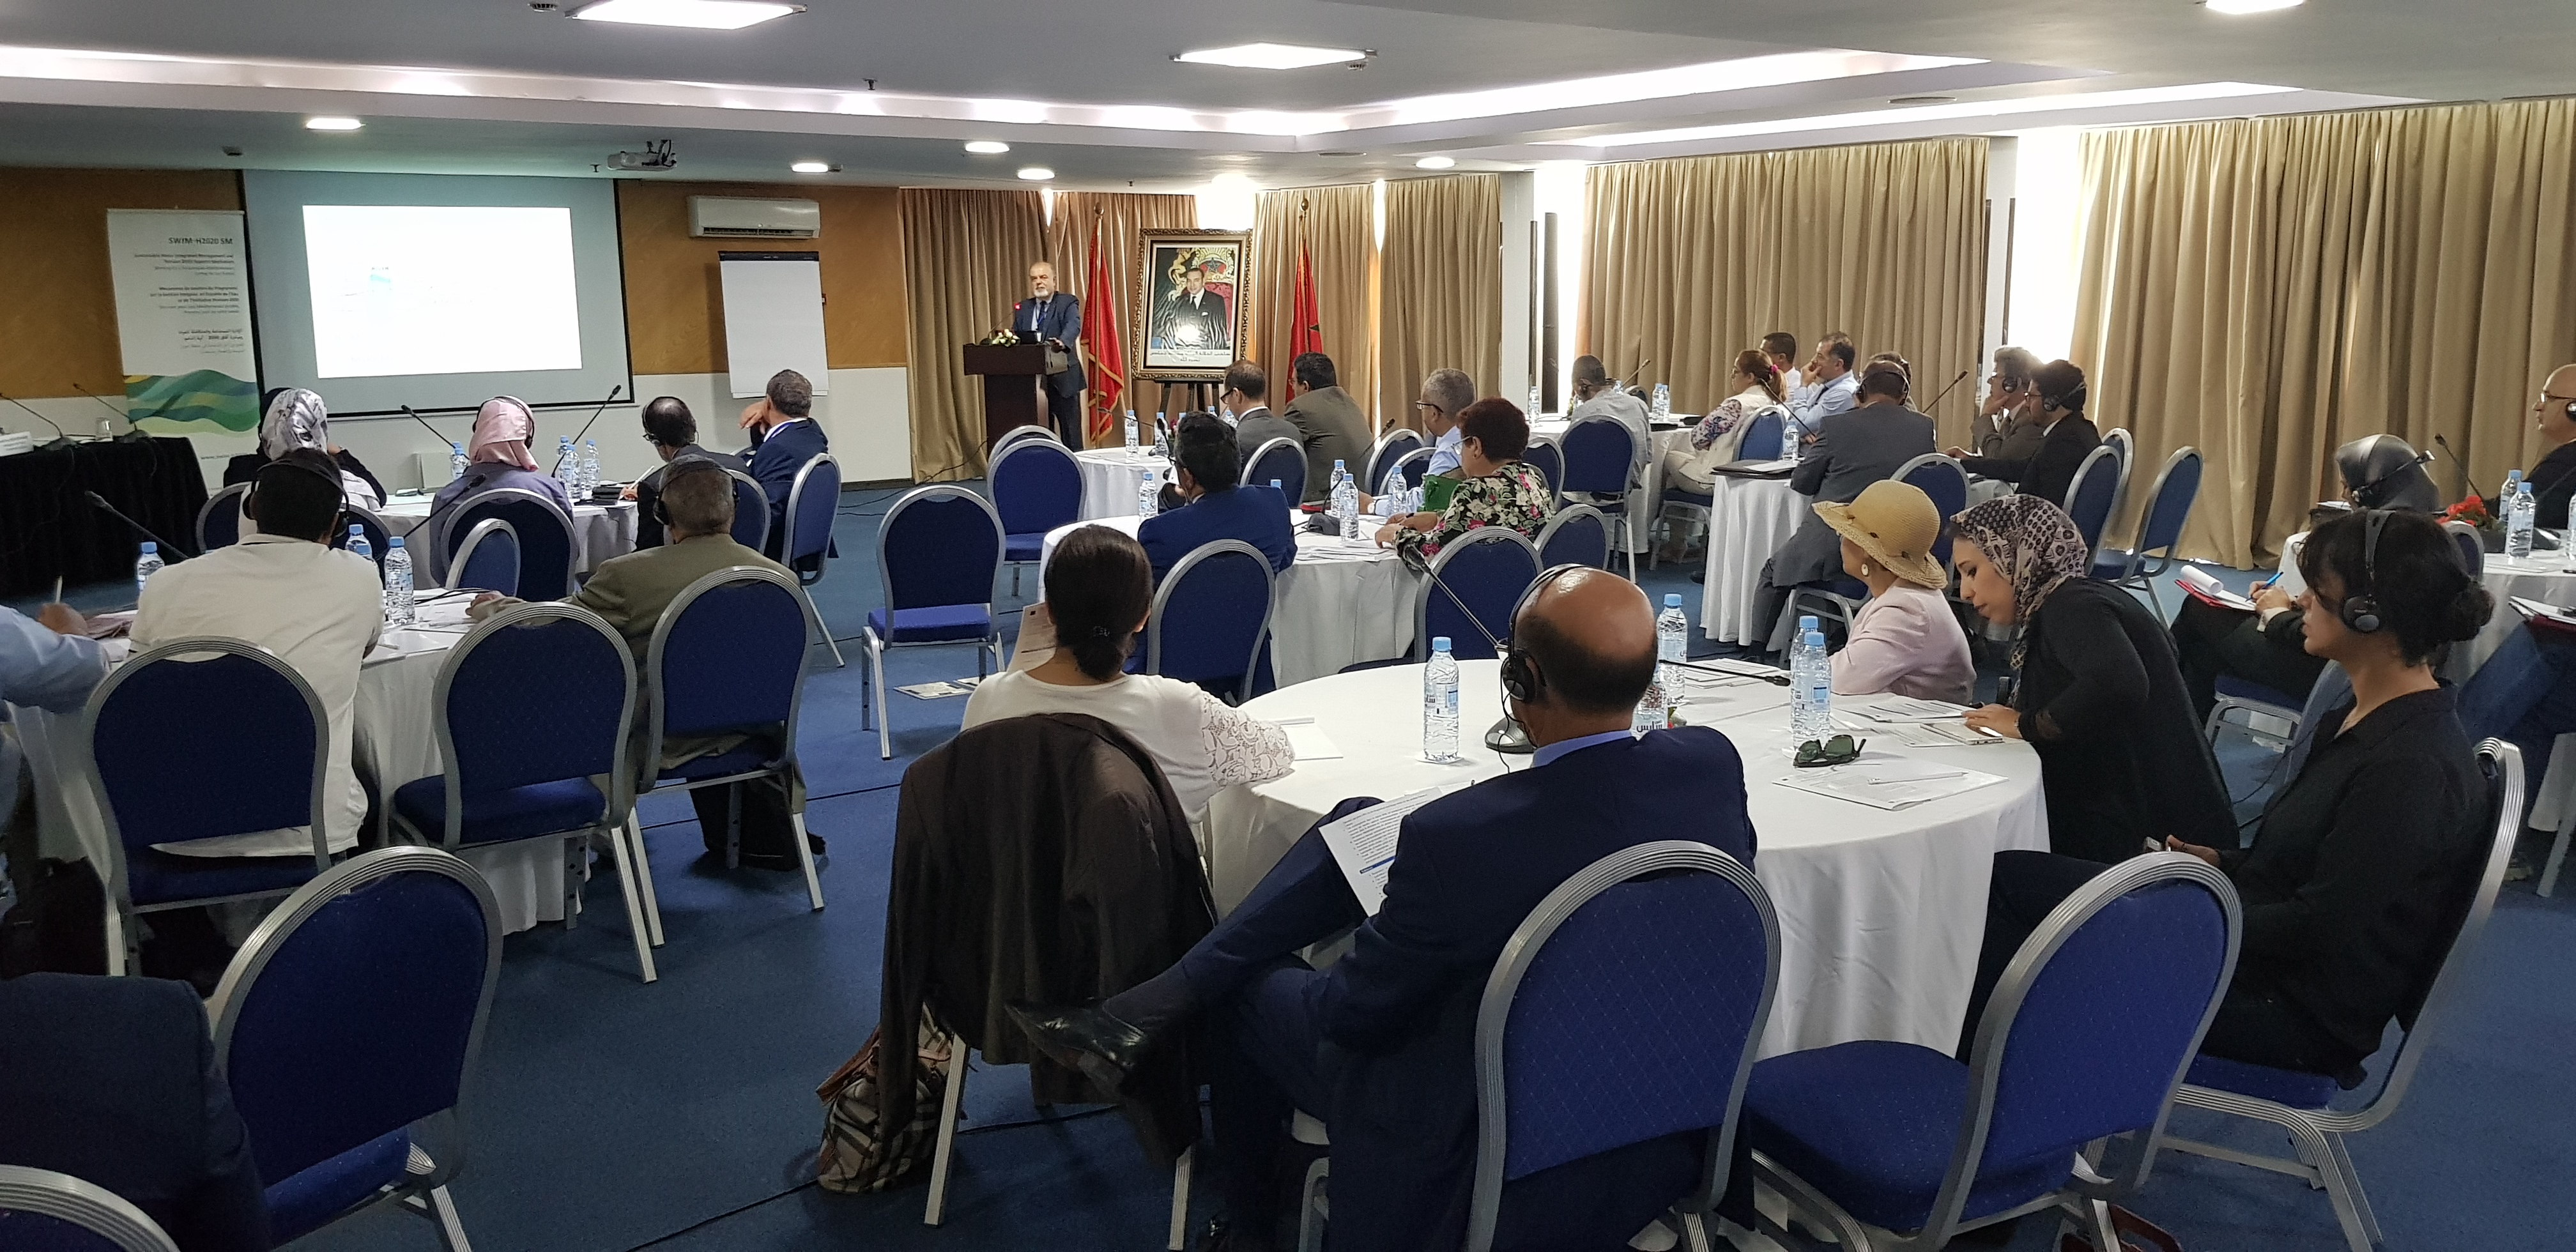 17-18 September 2018, Rabat, Morocco – SWIM-H2020 SM Consultation on the coastal diagnosis of the region and formulation of a vision and an action plan for an integrated management of the coastal zones